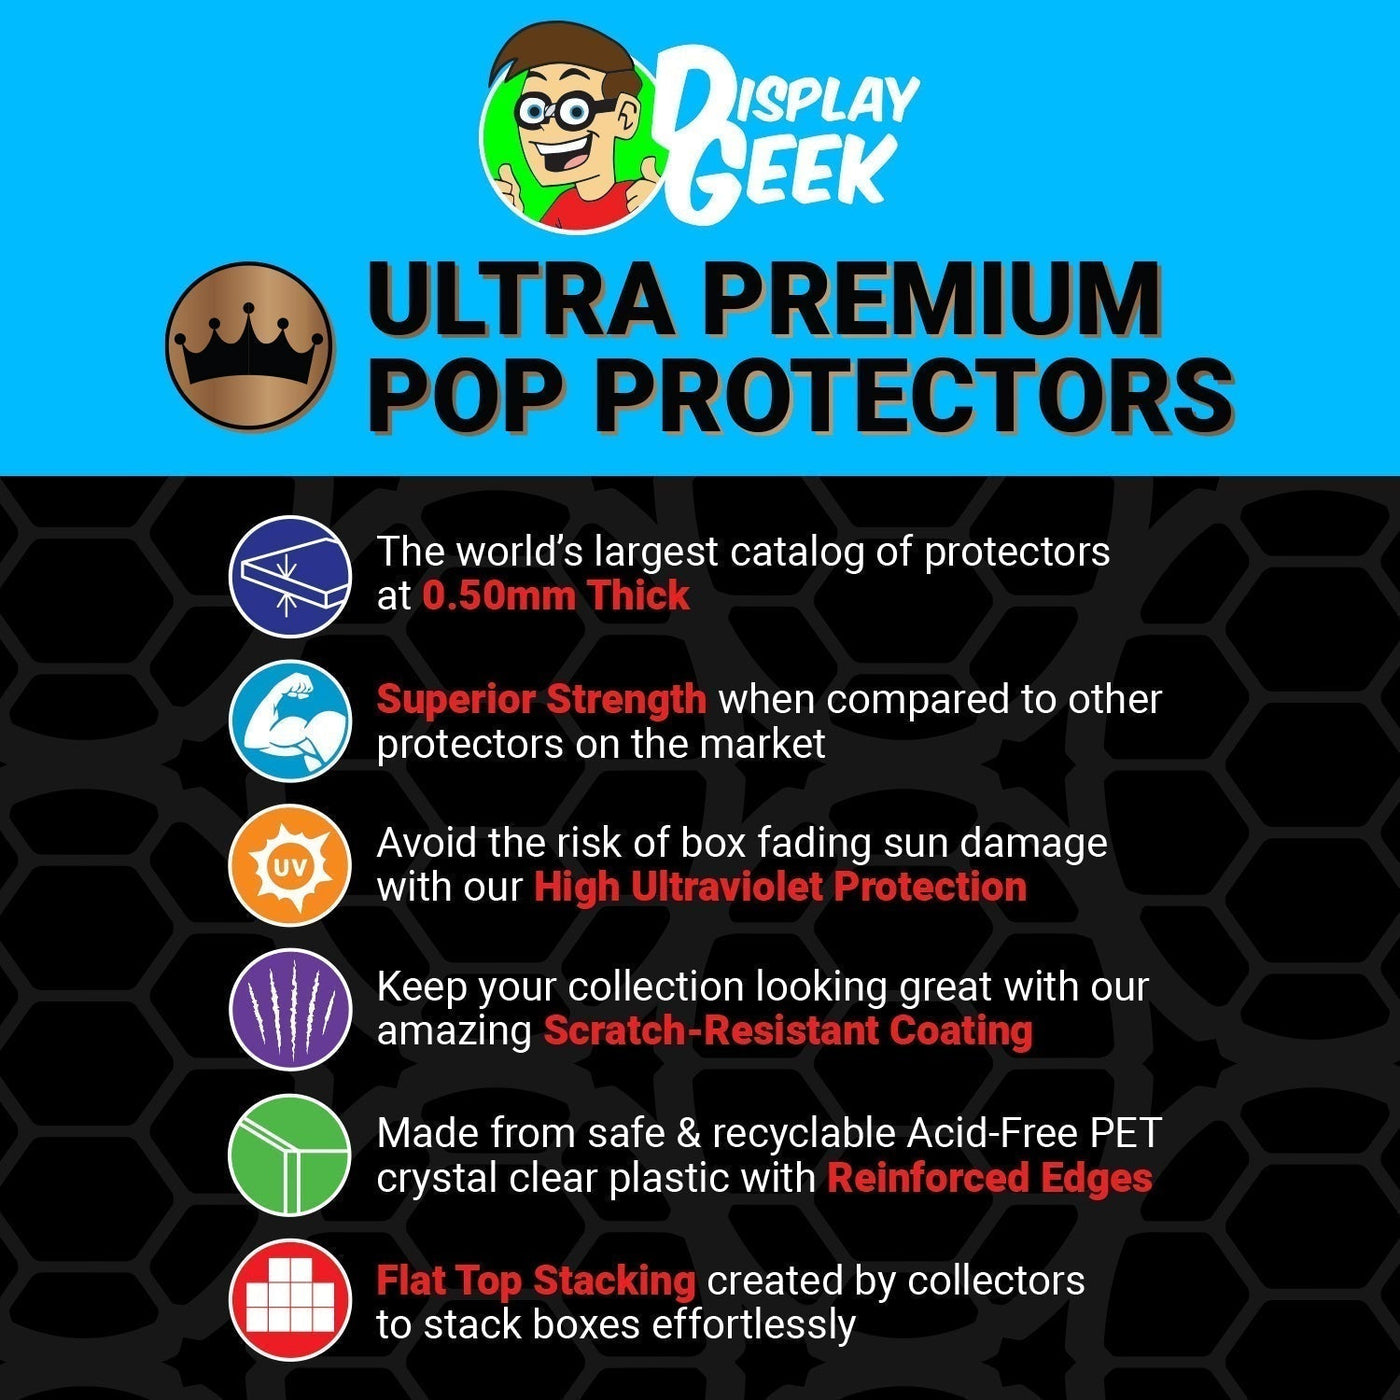 20 Pack of Pop Protector for 4 inch Standard Funko Pops on The Protector Guide App by Display Geek